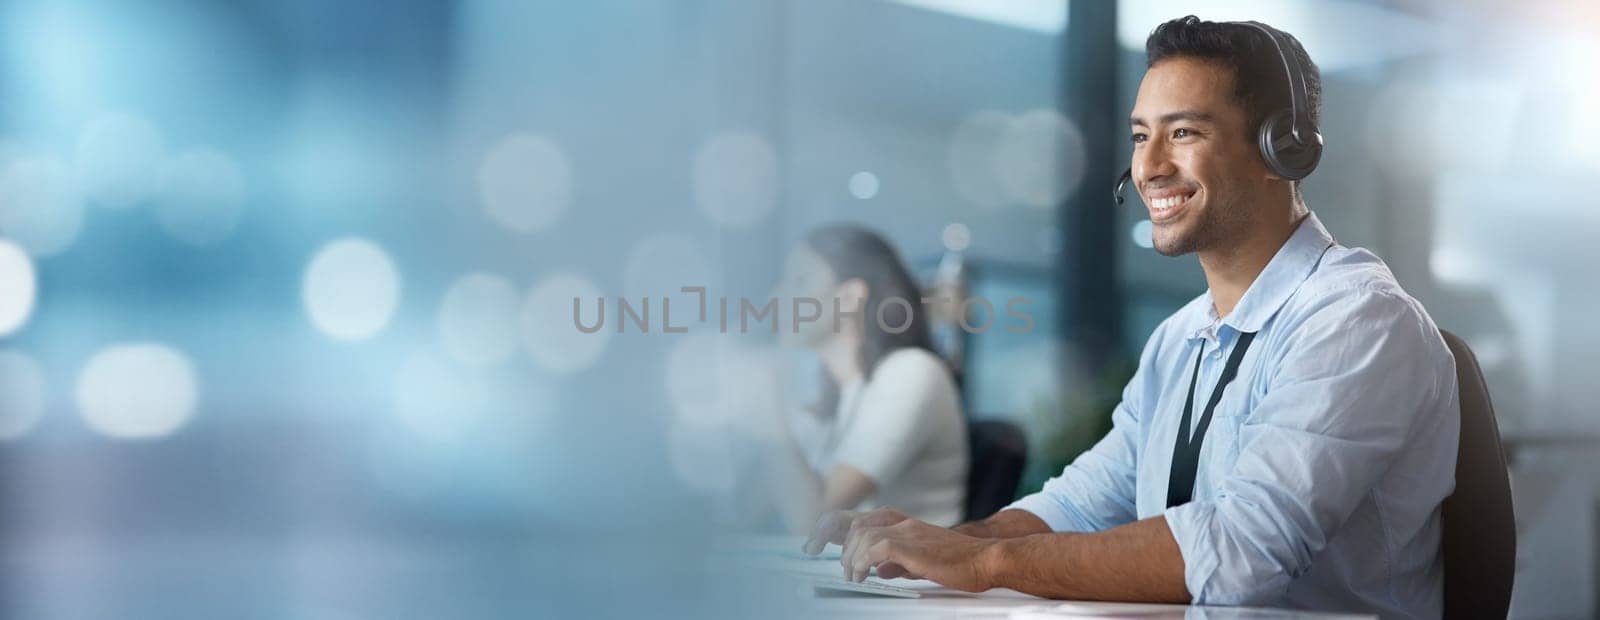 Crm, mockup or consultant typing in a call center helping, talking or networking online via email. Digital, happy Asian man or insurance agent smiles in communication at customer services or sales.